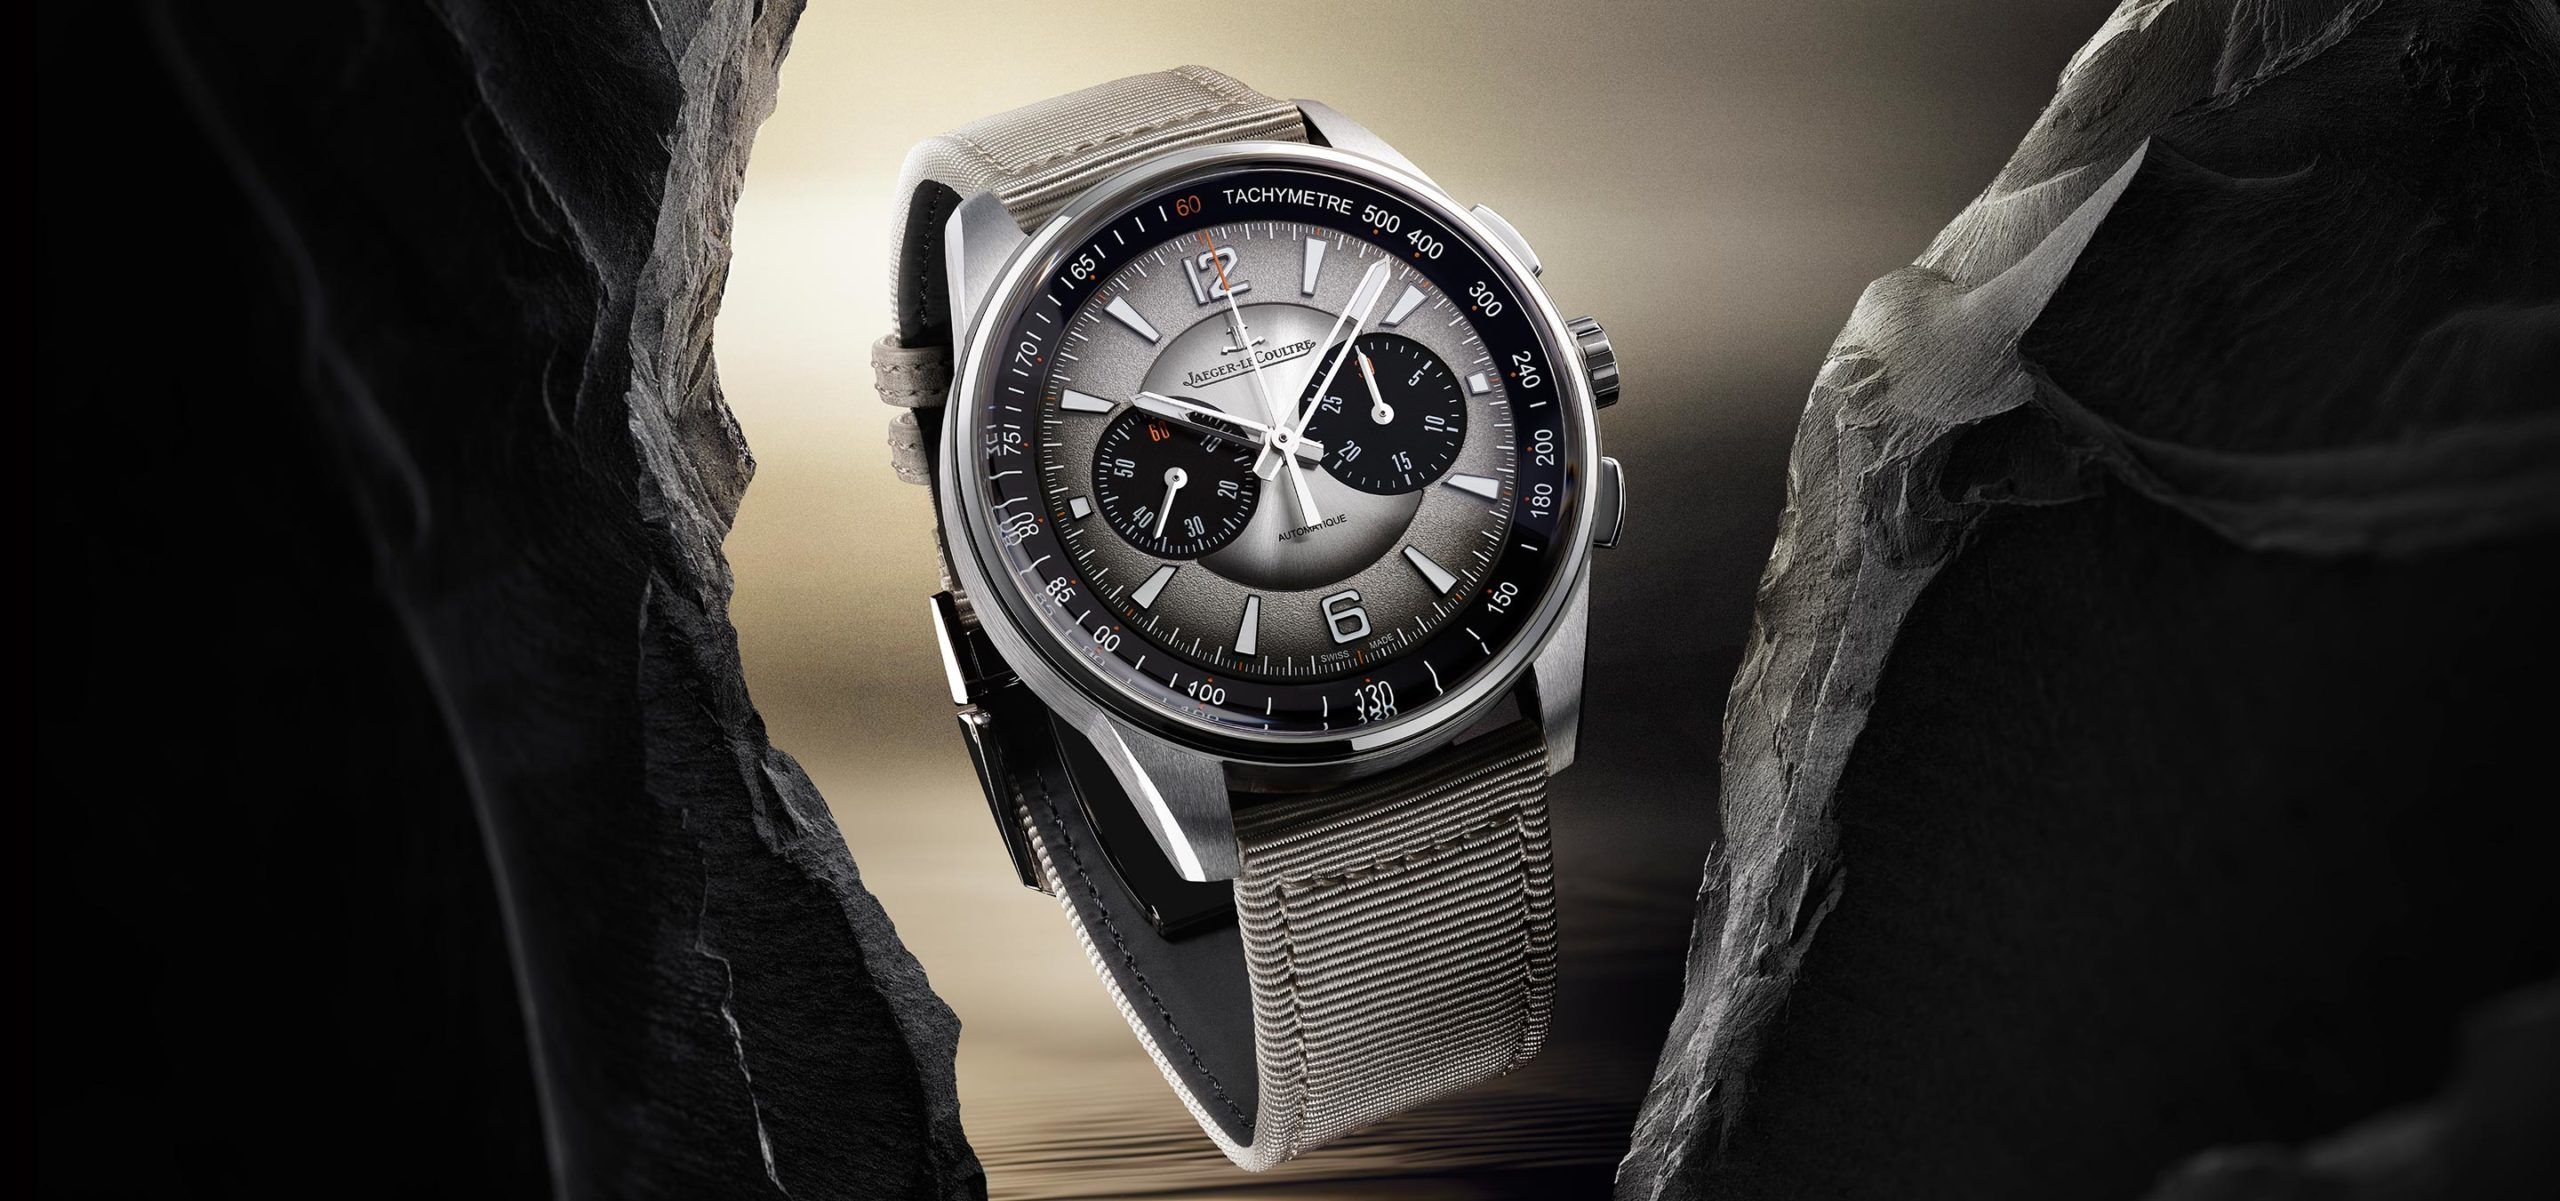 Presenting The Jaeger-LeCoultre Polaris Chronograph—Sporting Two Lacquered Dial Variations